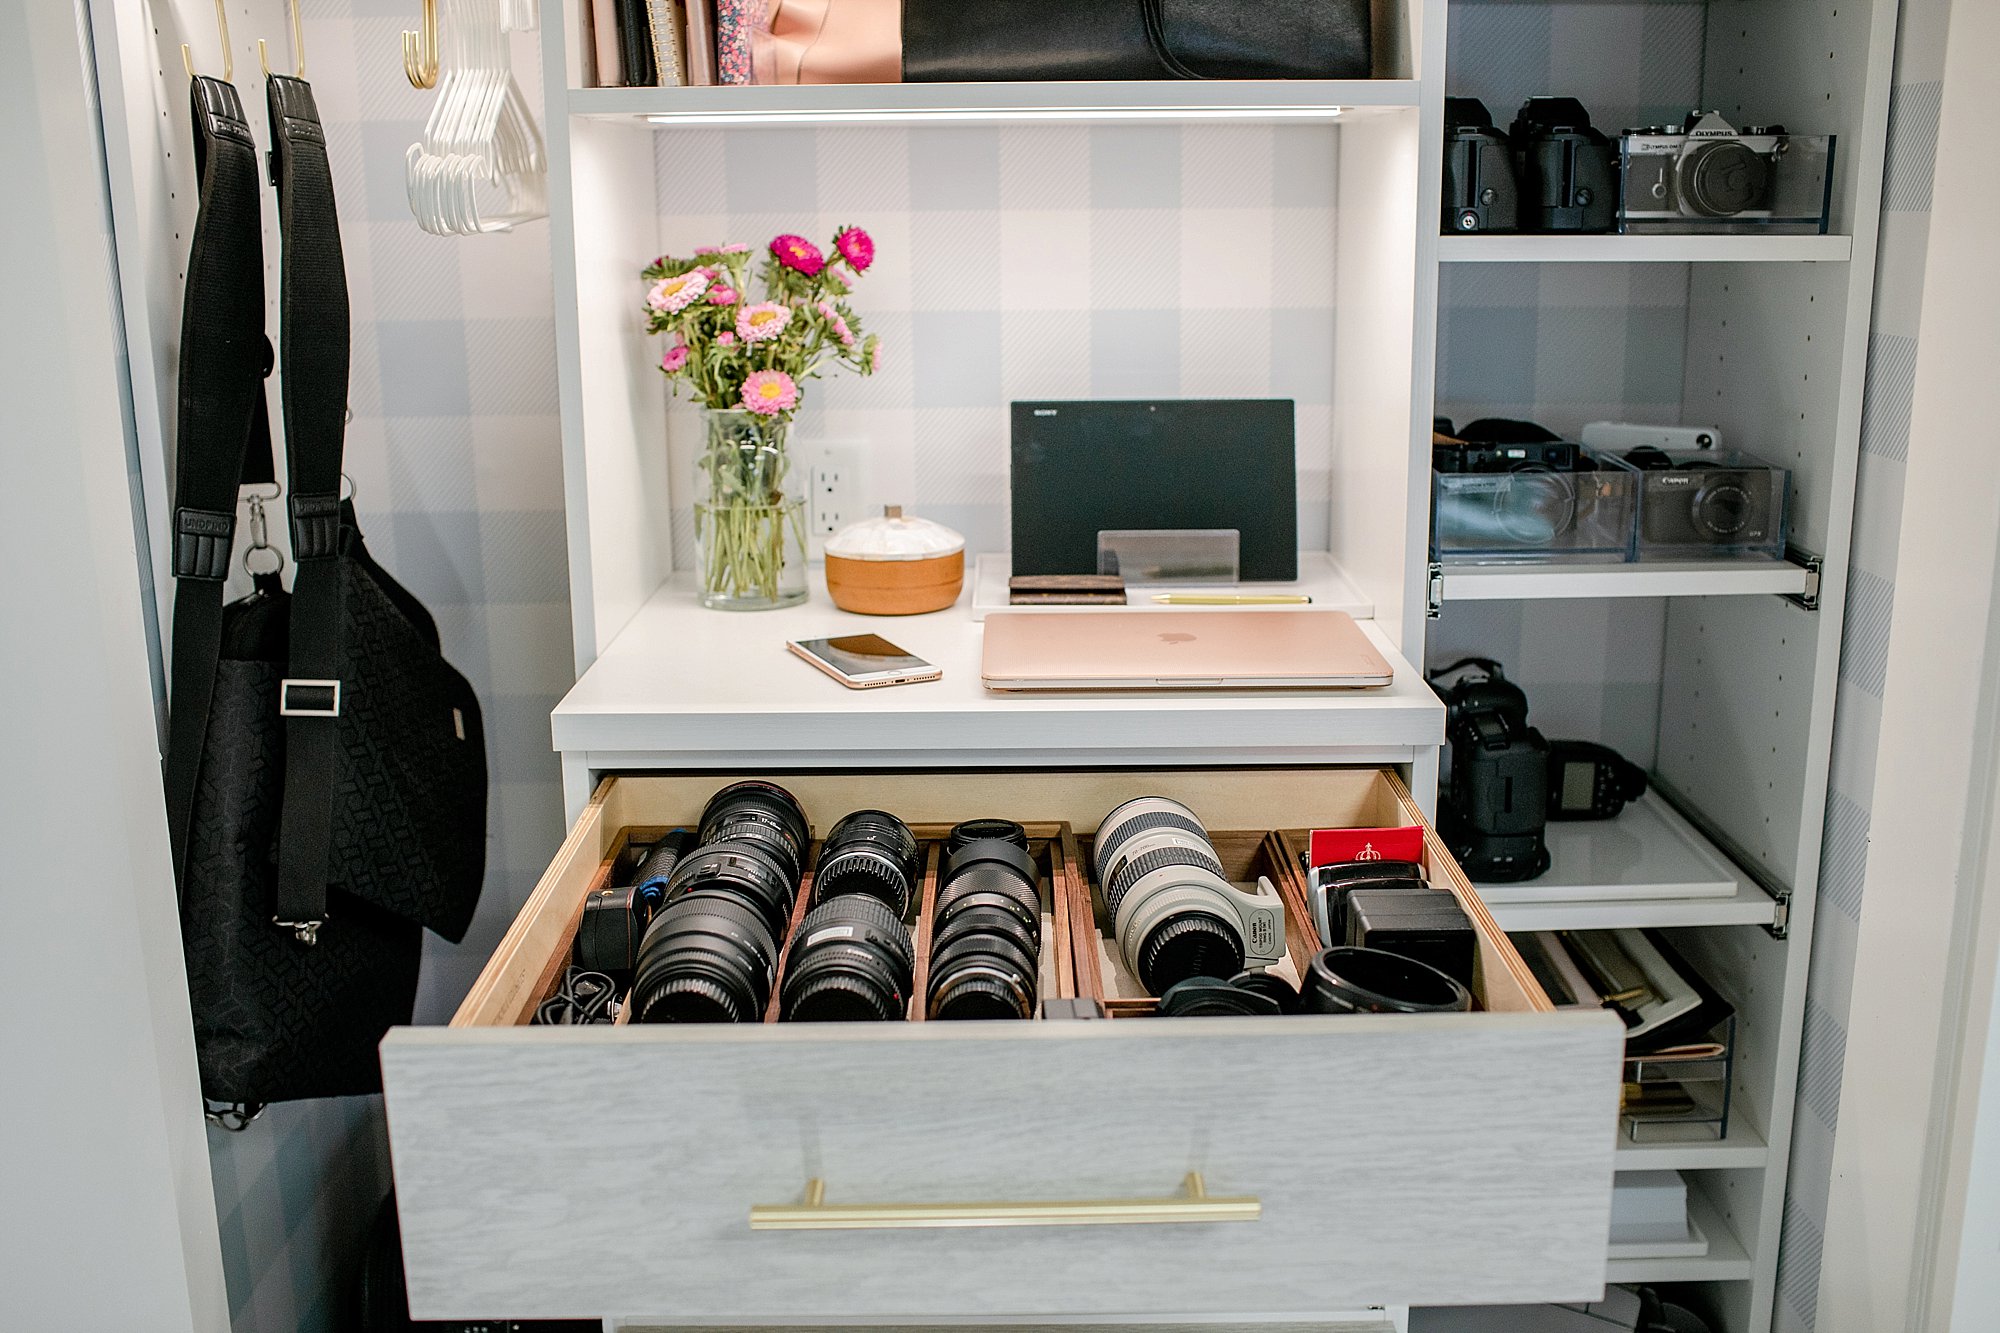 camera lens drawer in home office belonging to blogger and photographer Diana Elizabeth. See more on the blog post! #blogger #photographer #organization #office